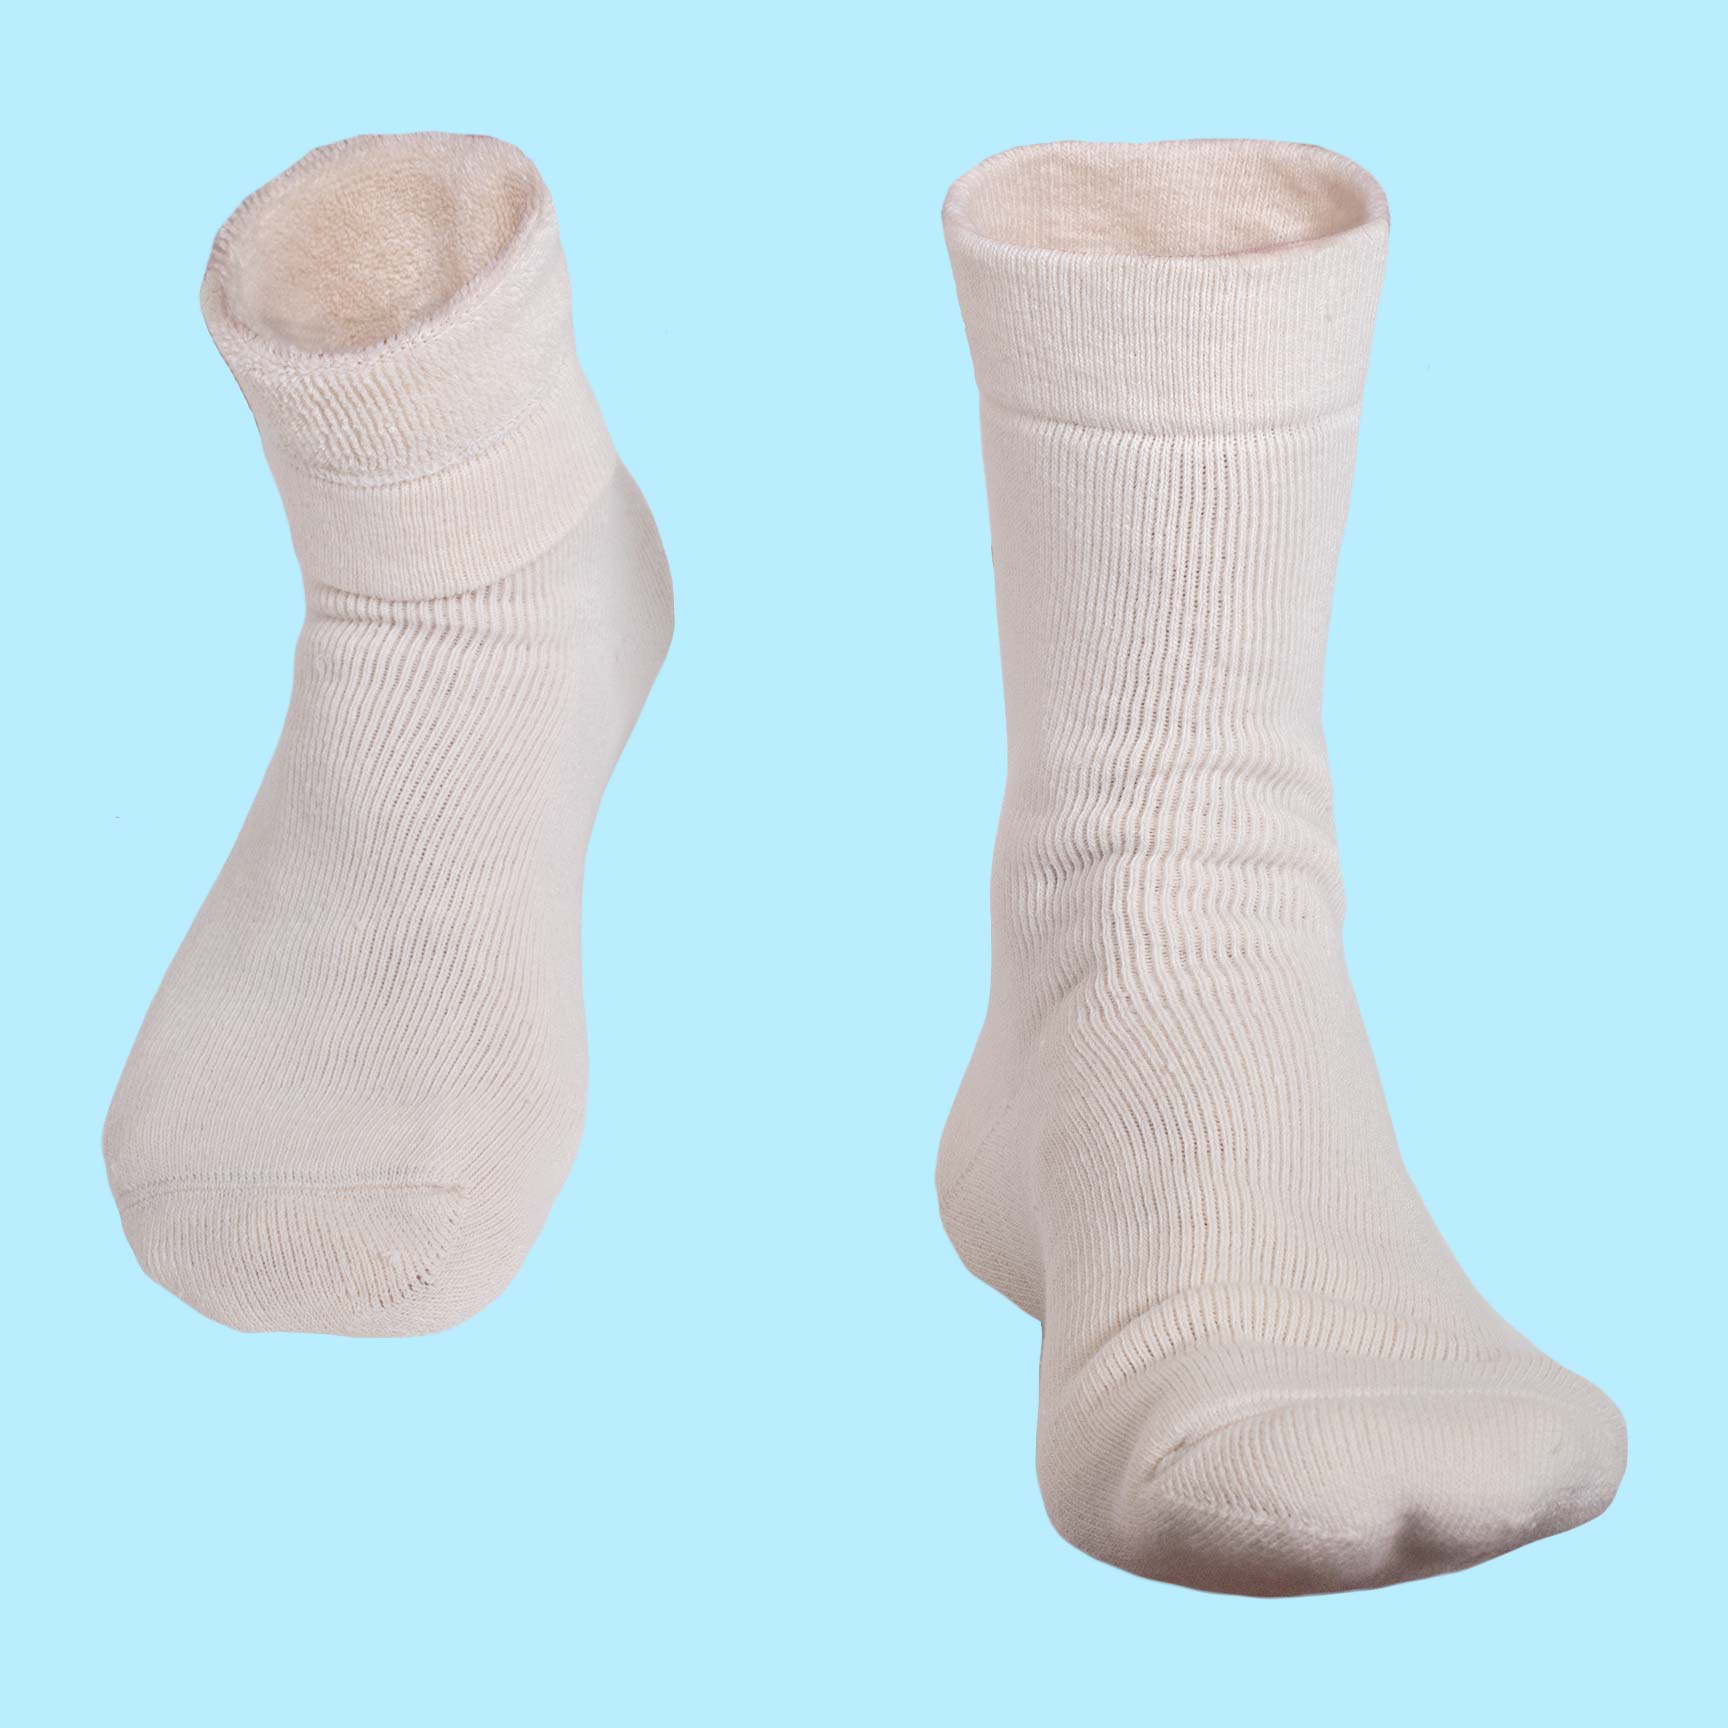 6 Pairs Unisex Natural Cotton Socks Breathable Soft Organic High Ankle  Cotton Socks 